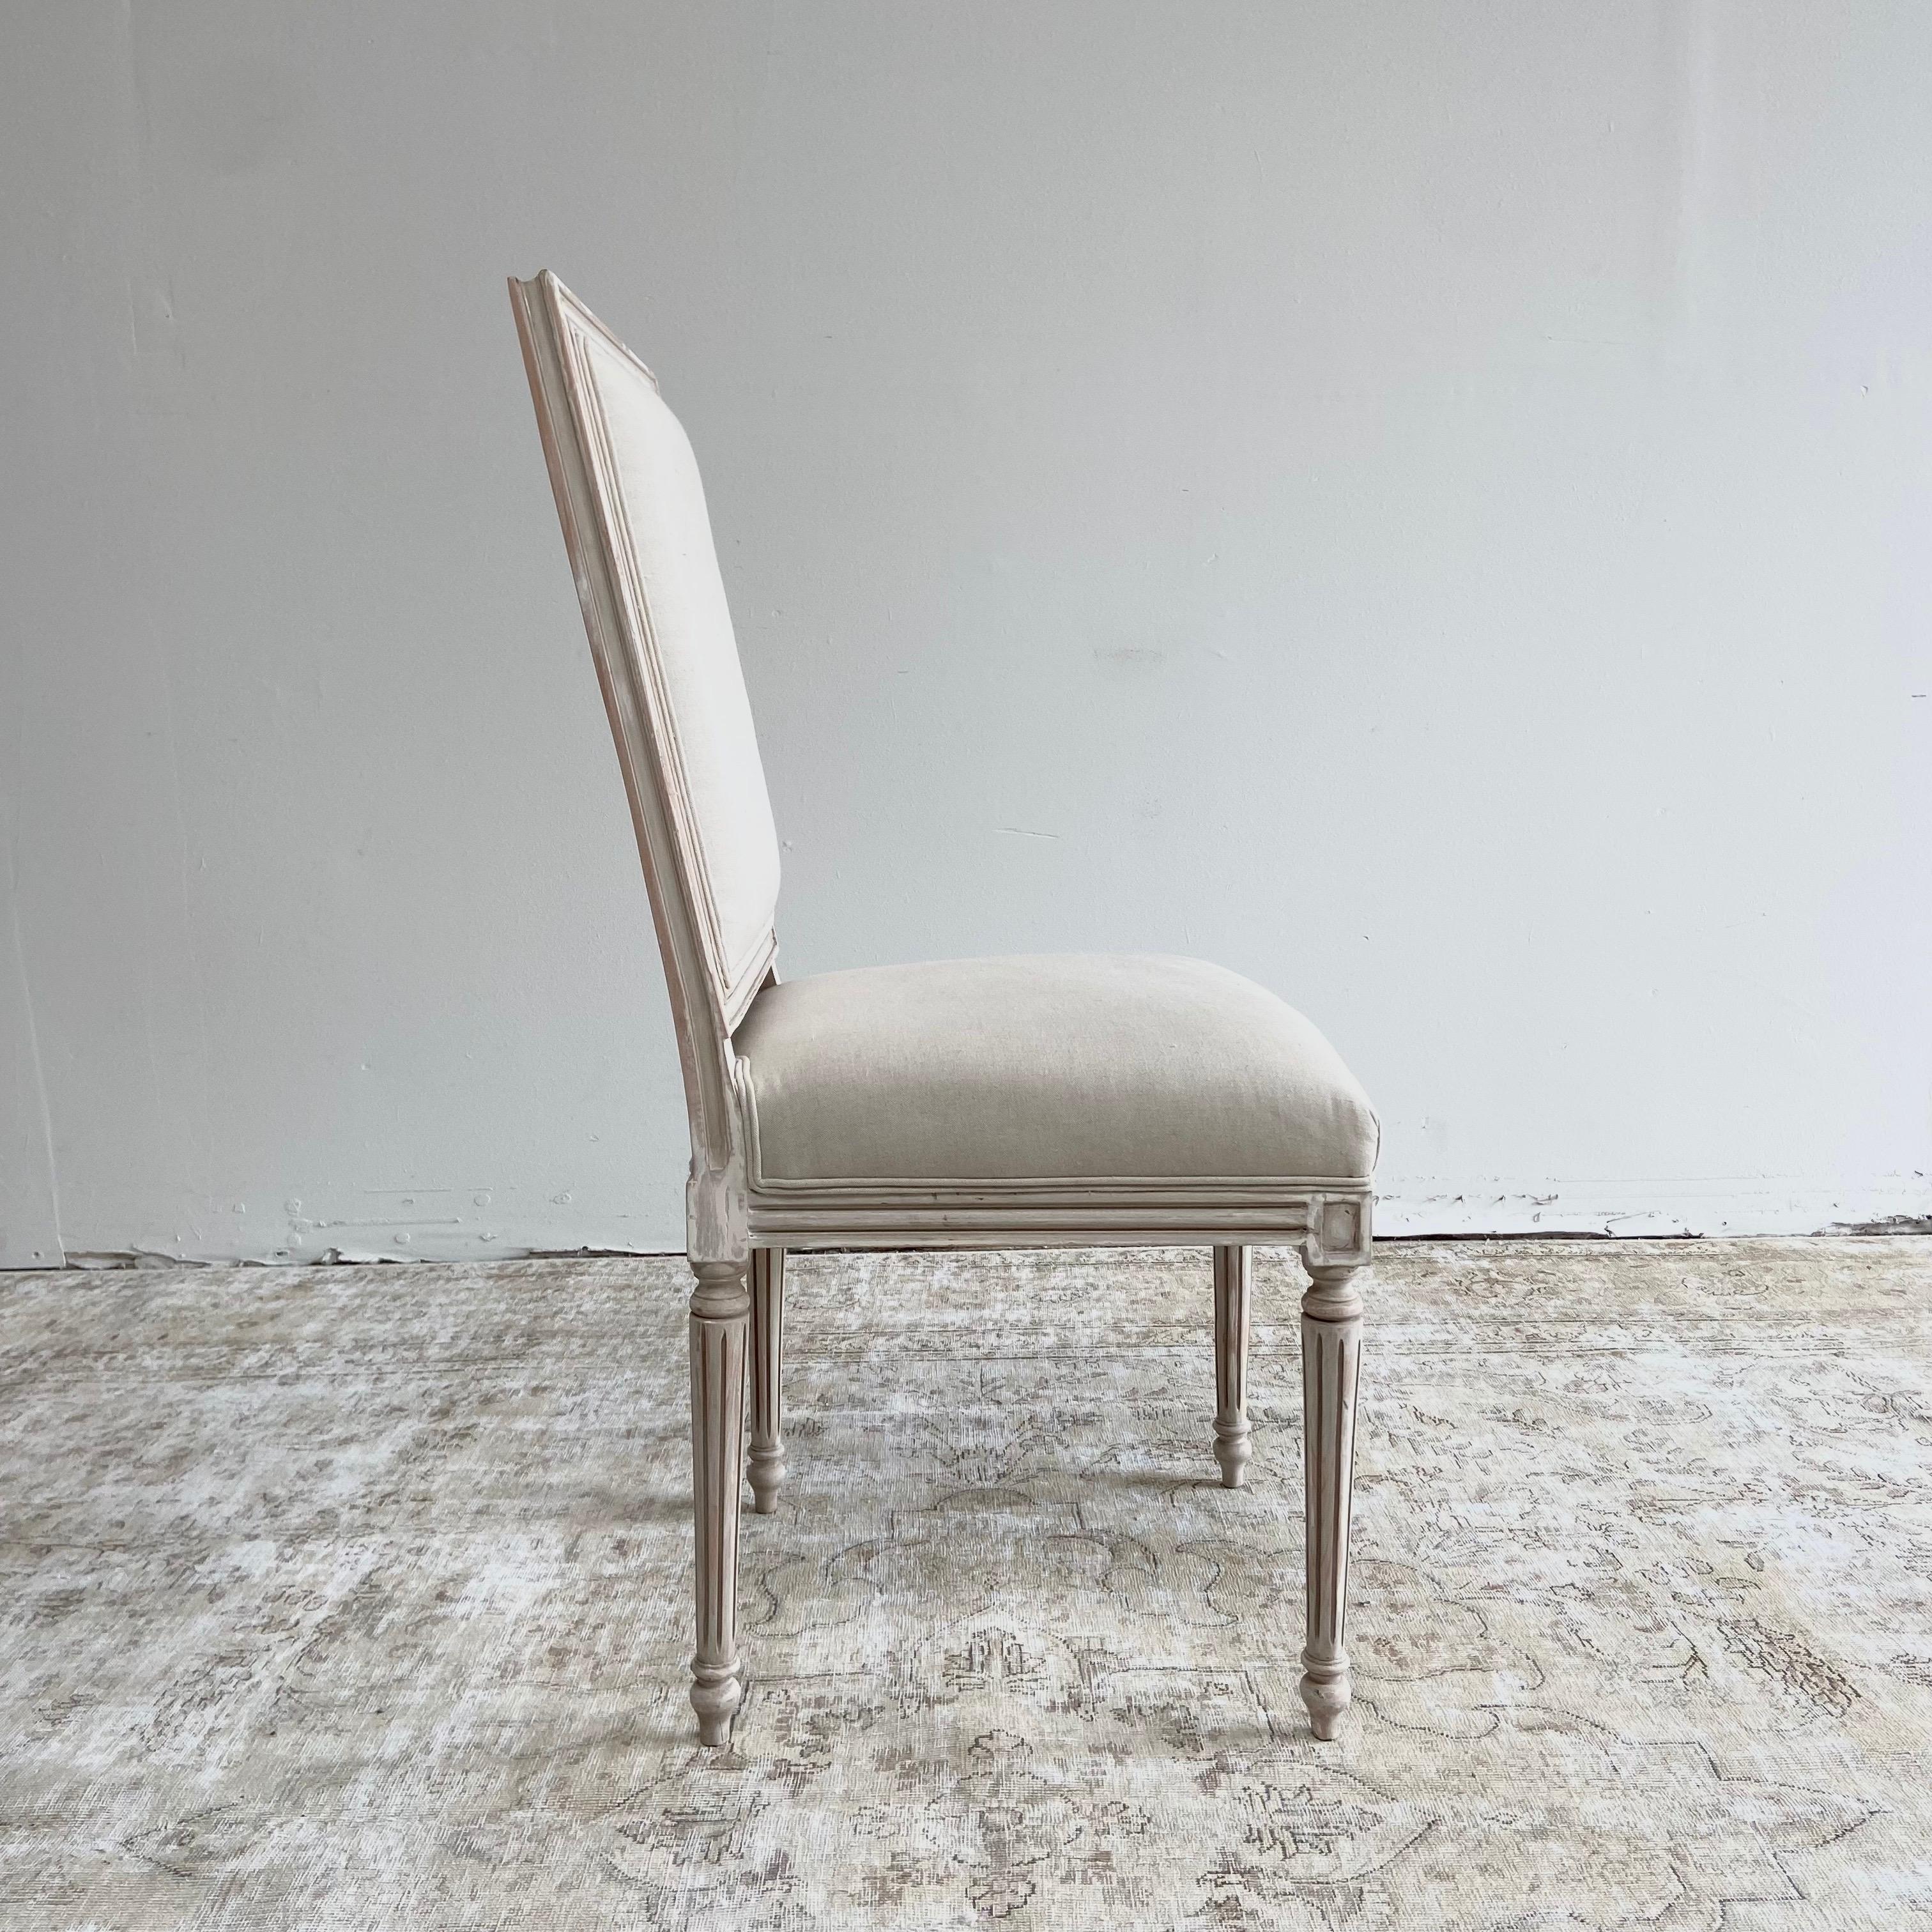 This listing includes 2 total dining chairs, in a distressed creamy white painted wood, and upholstered back and seat.
Upholstery is in a canvas cloth, can be reupholstered by us at an additional fee, we offer linen, leather, and other types of